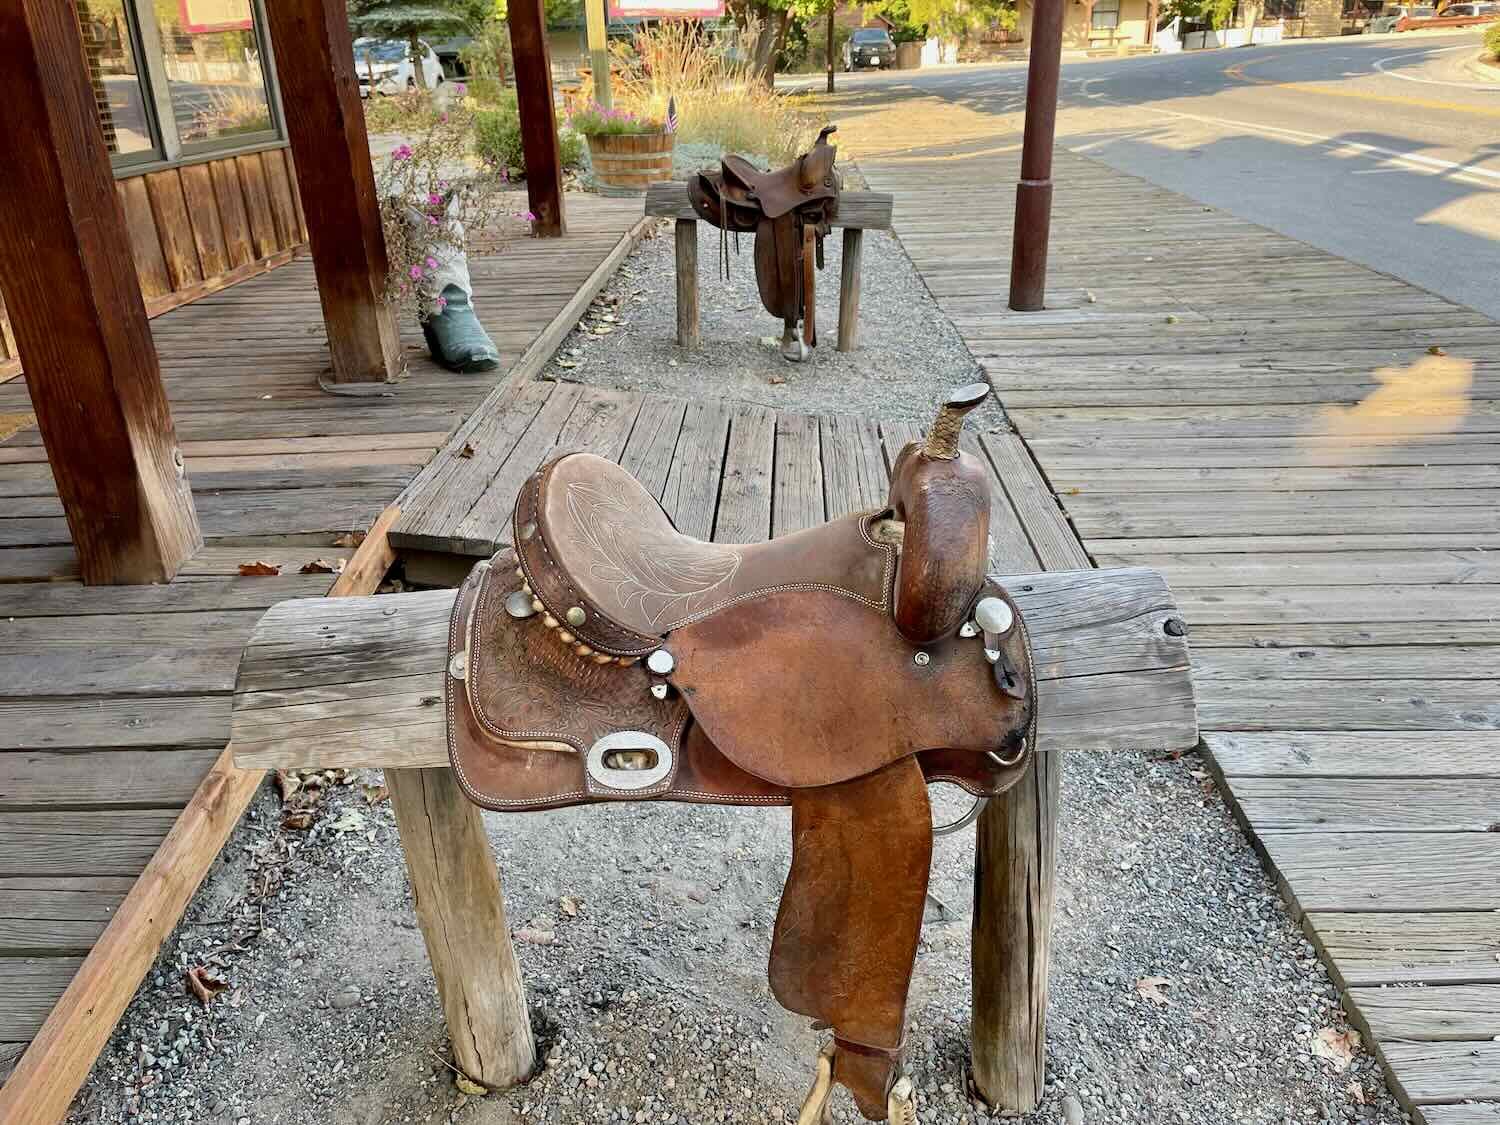 Saddles at the entrance to a shop in Winthrop, WA